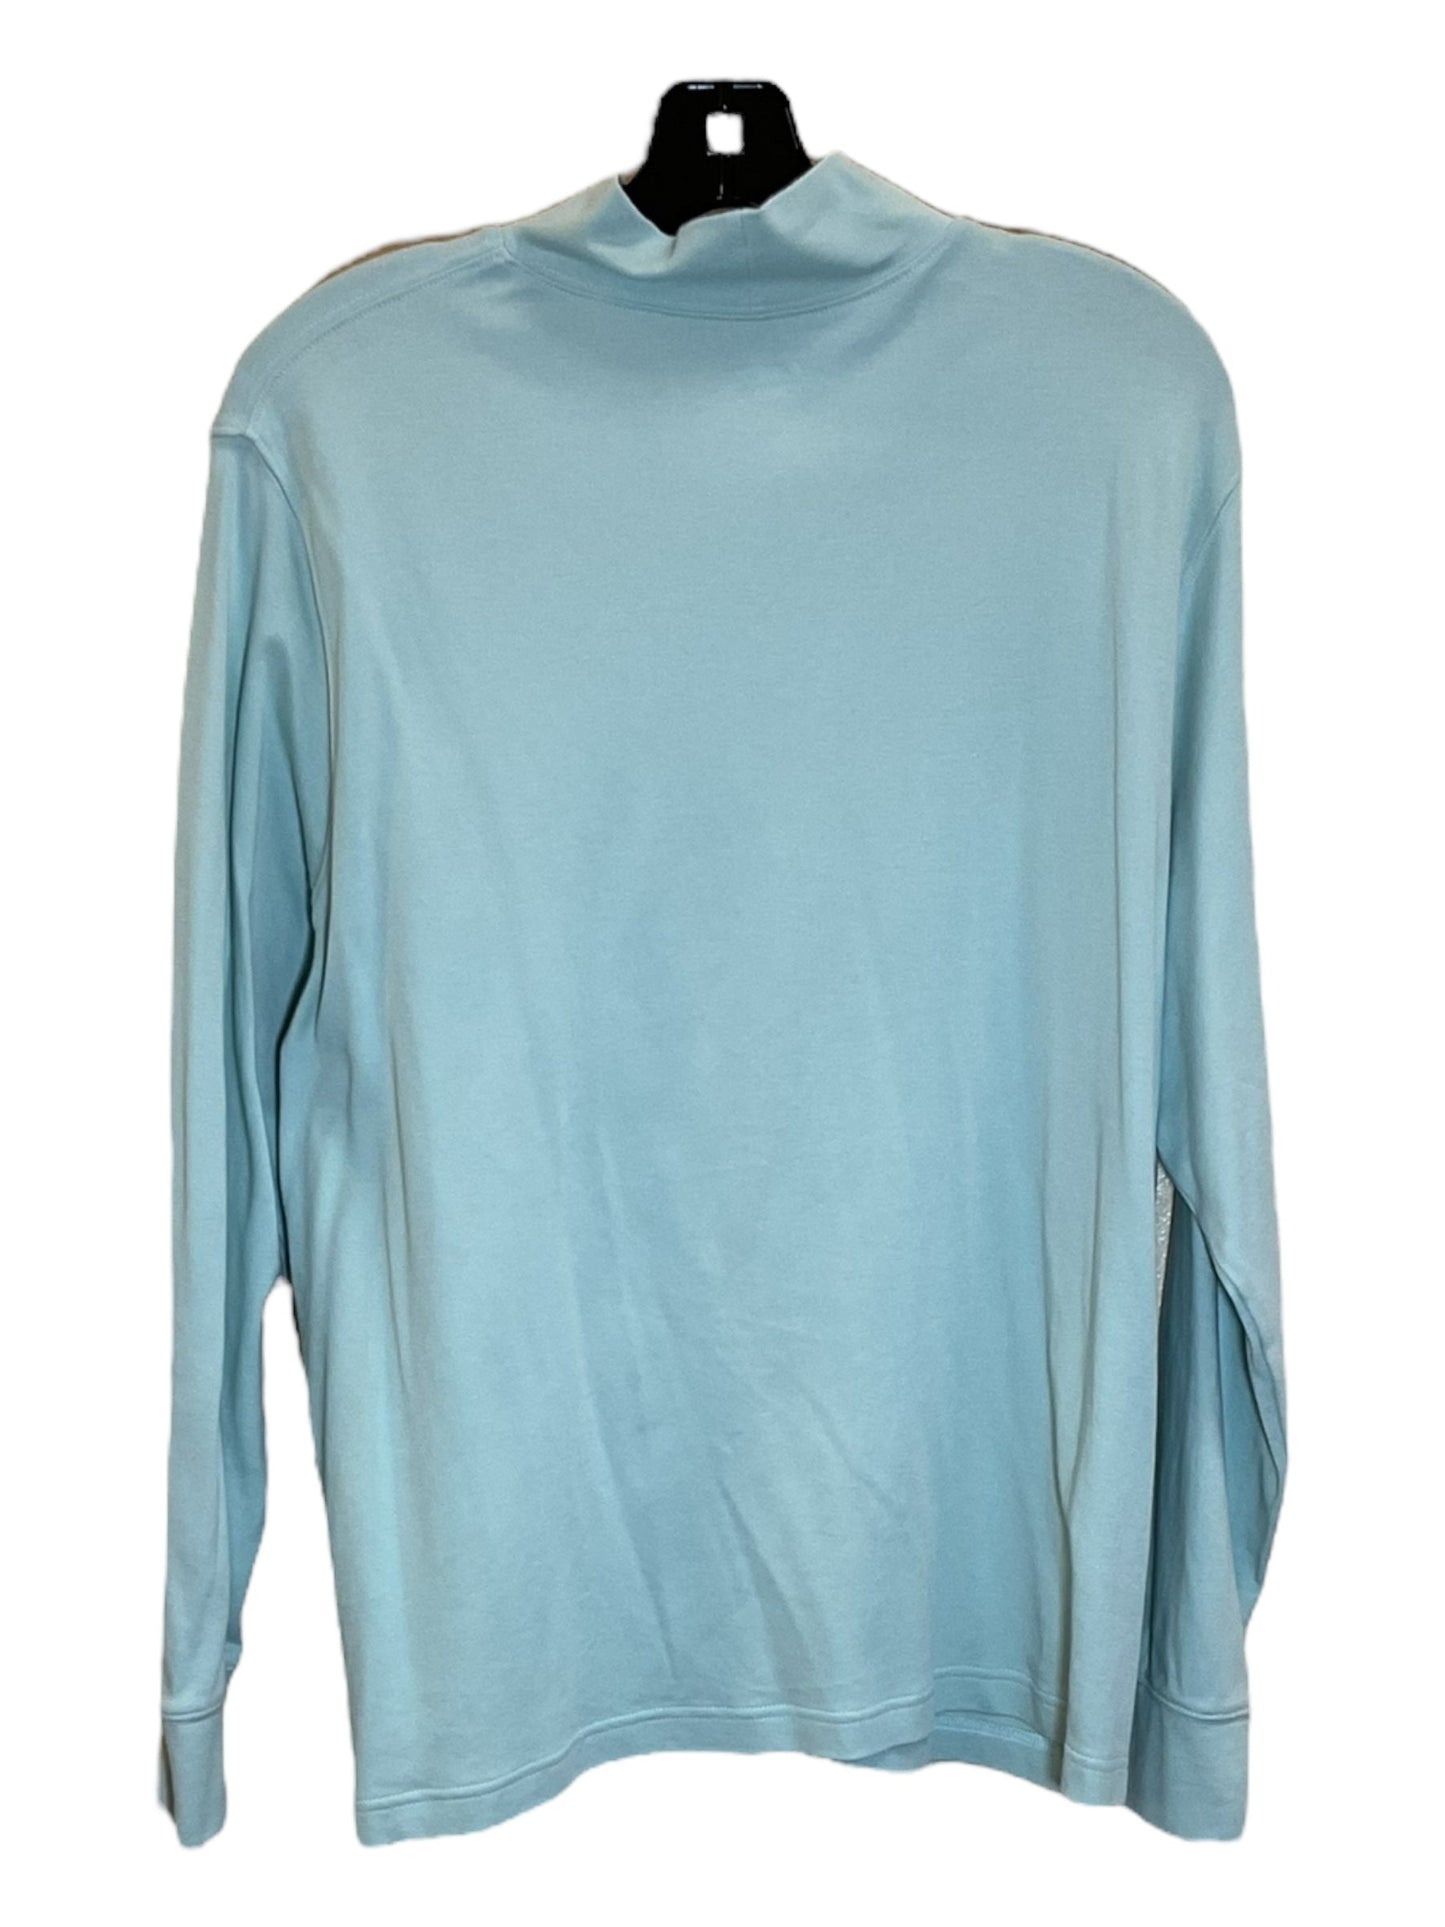 Green Top Long Sleeve Lands End, Size 1x